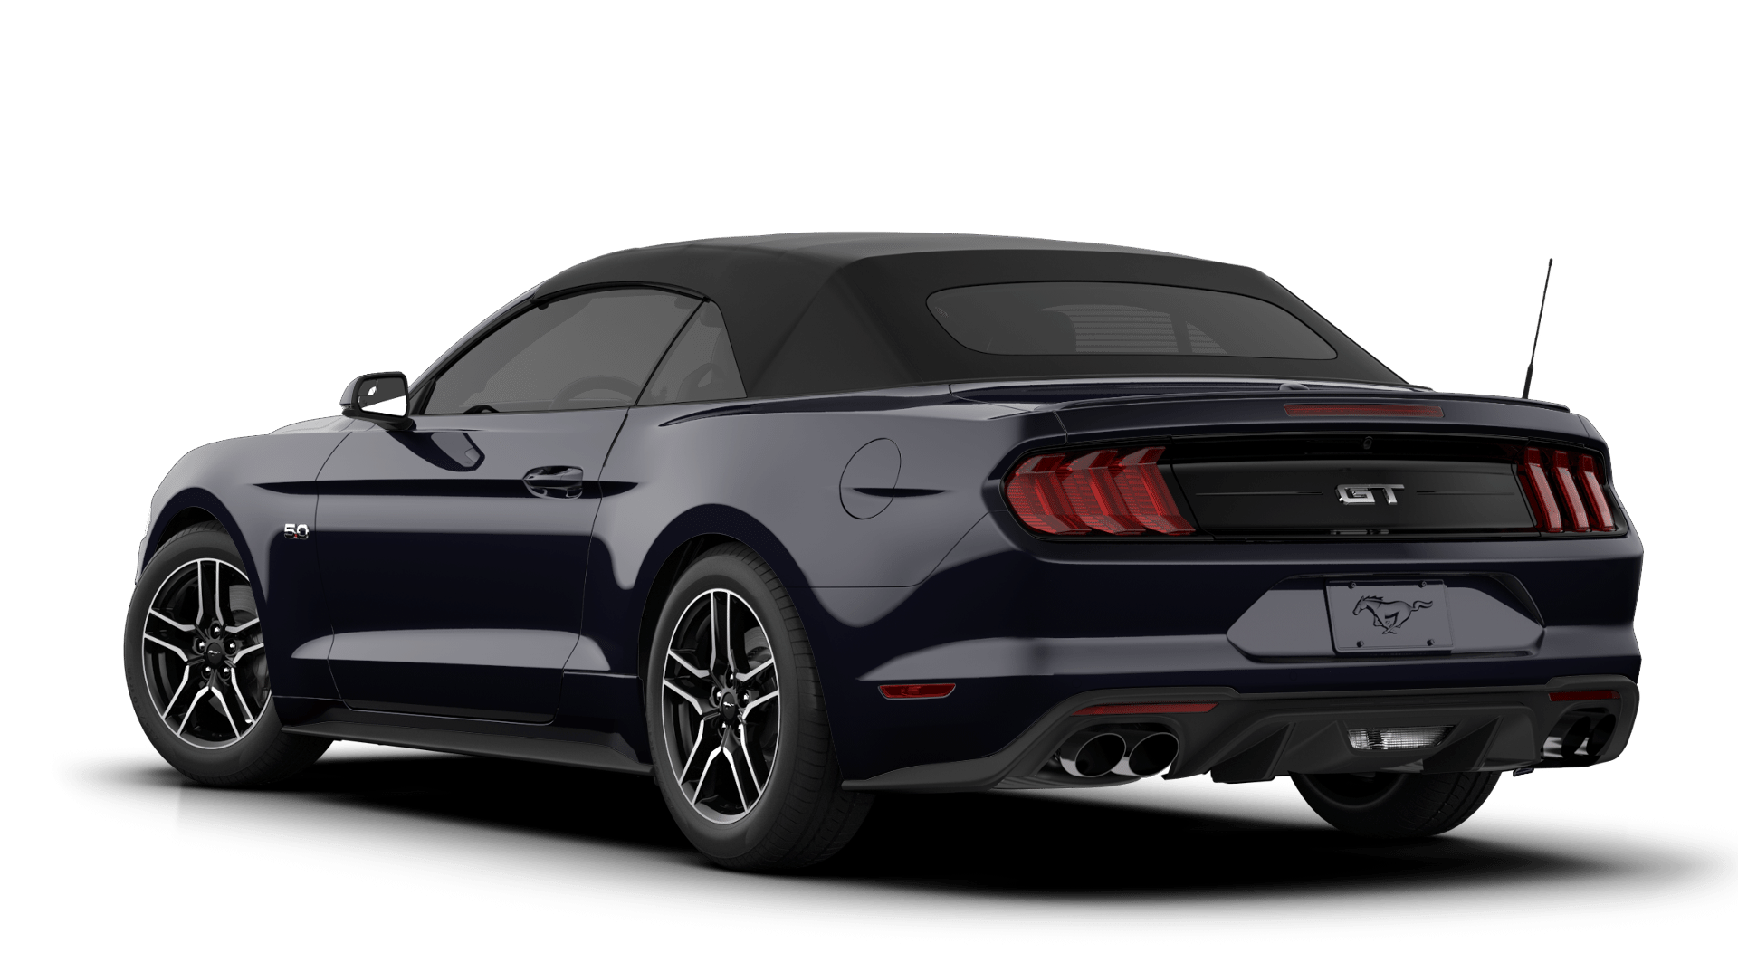 2020 Ford Mustang Gt Premium Automatic Convertible
